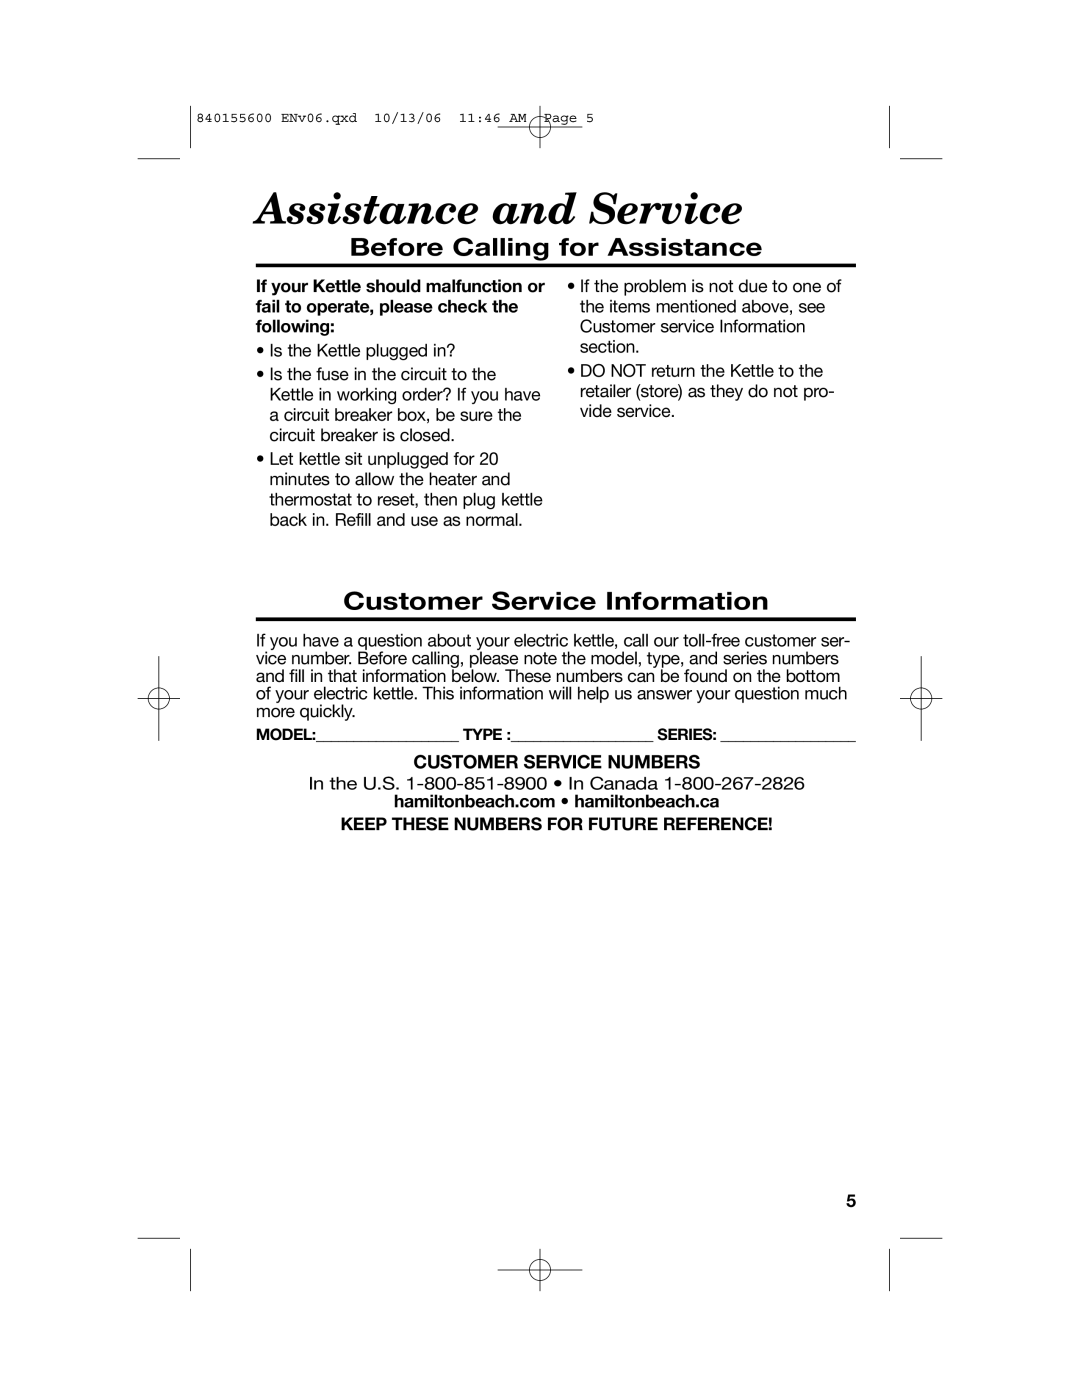 Hamilton Beach 40990 manual Assistance and Service, Before Calling for Assistance, Customer Service Information 